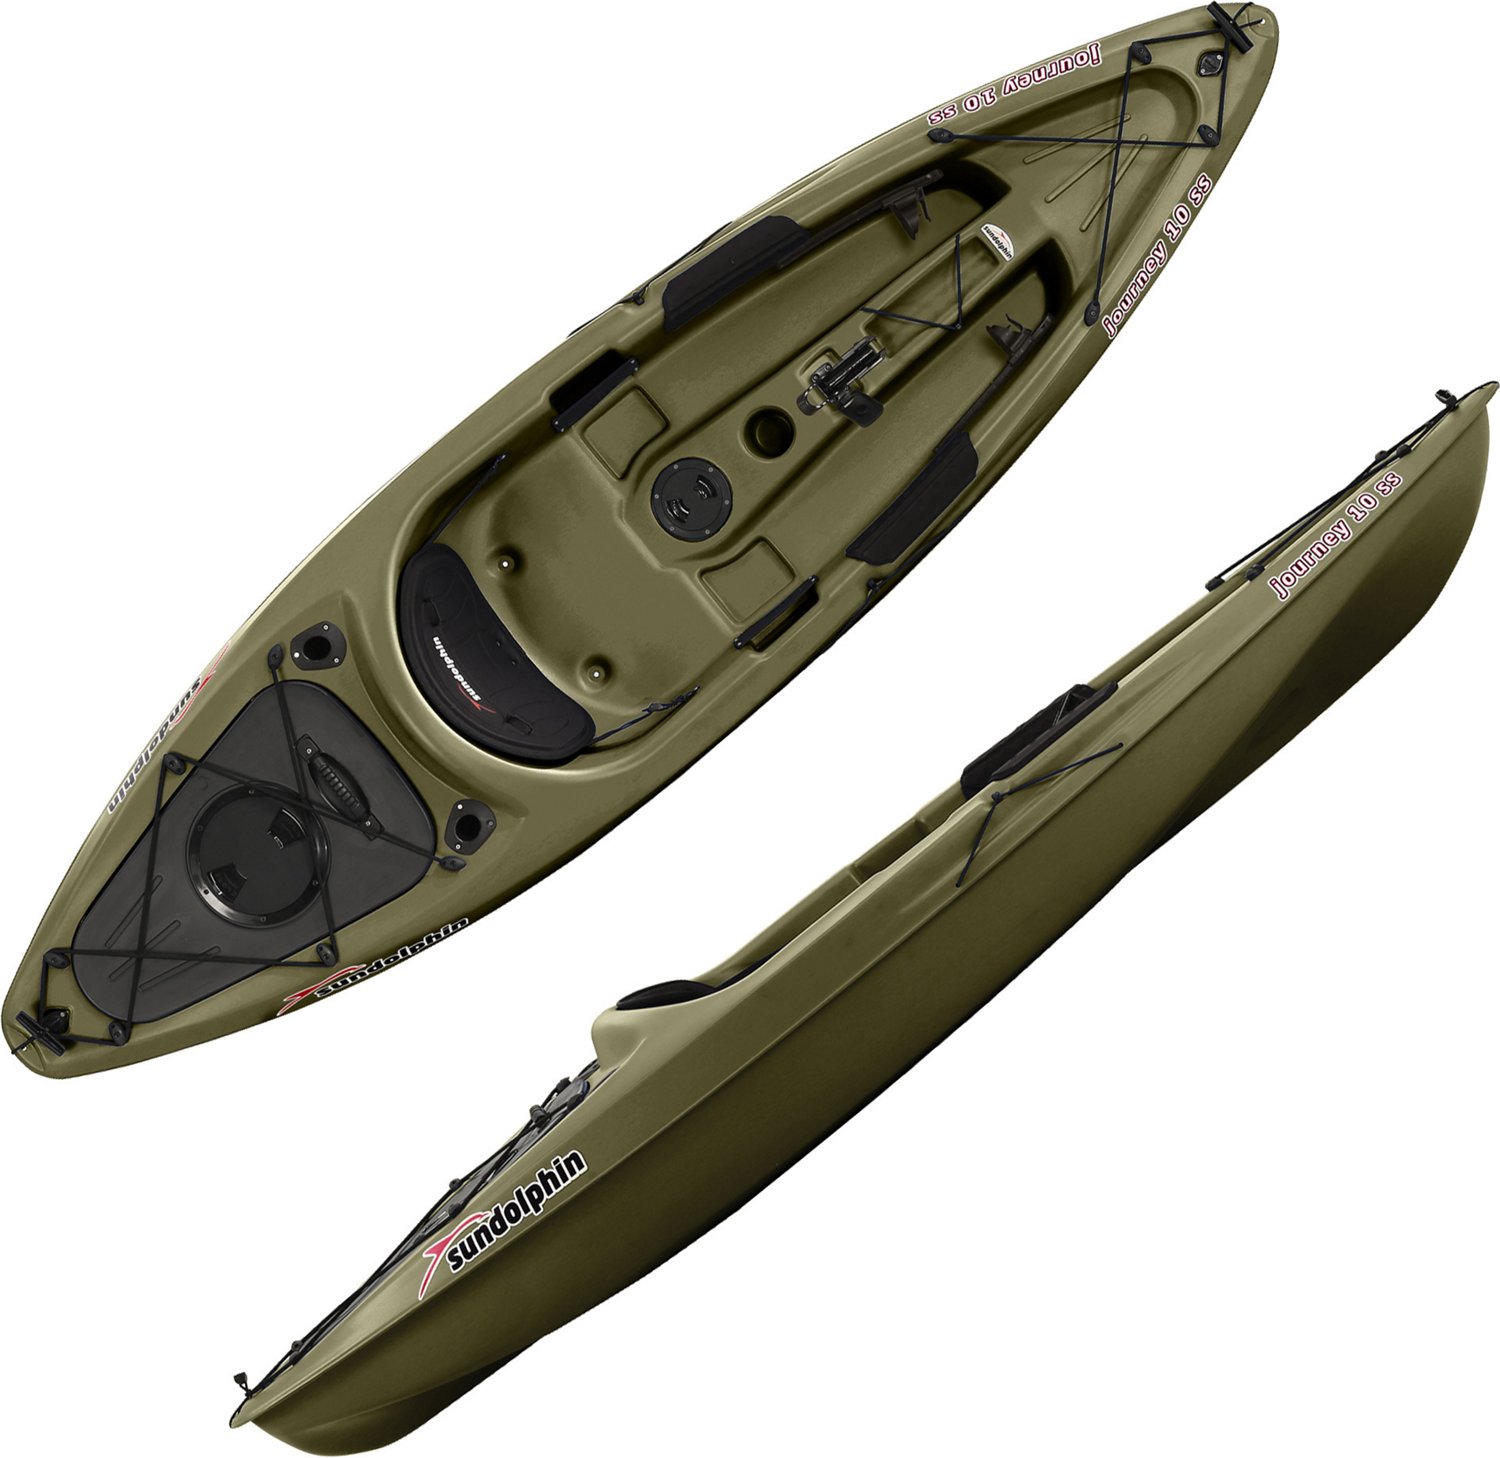 Kayak for Sale Buy Online with Afterpay | Camping Offers